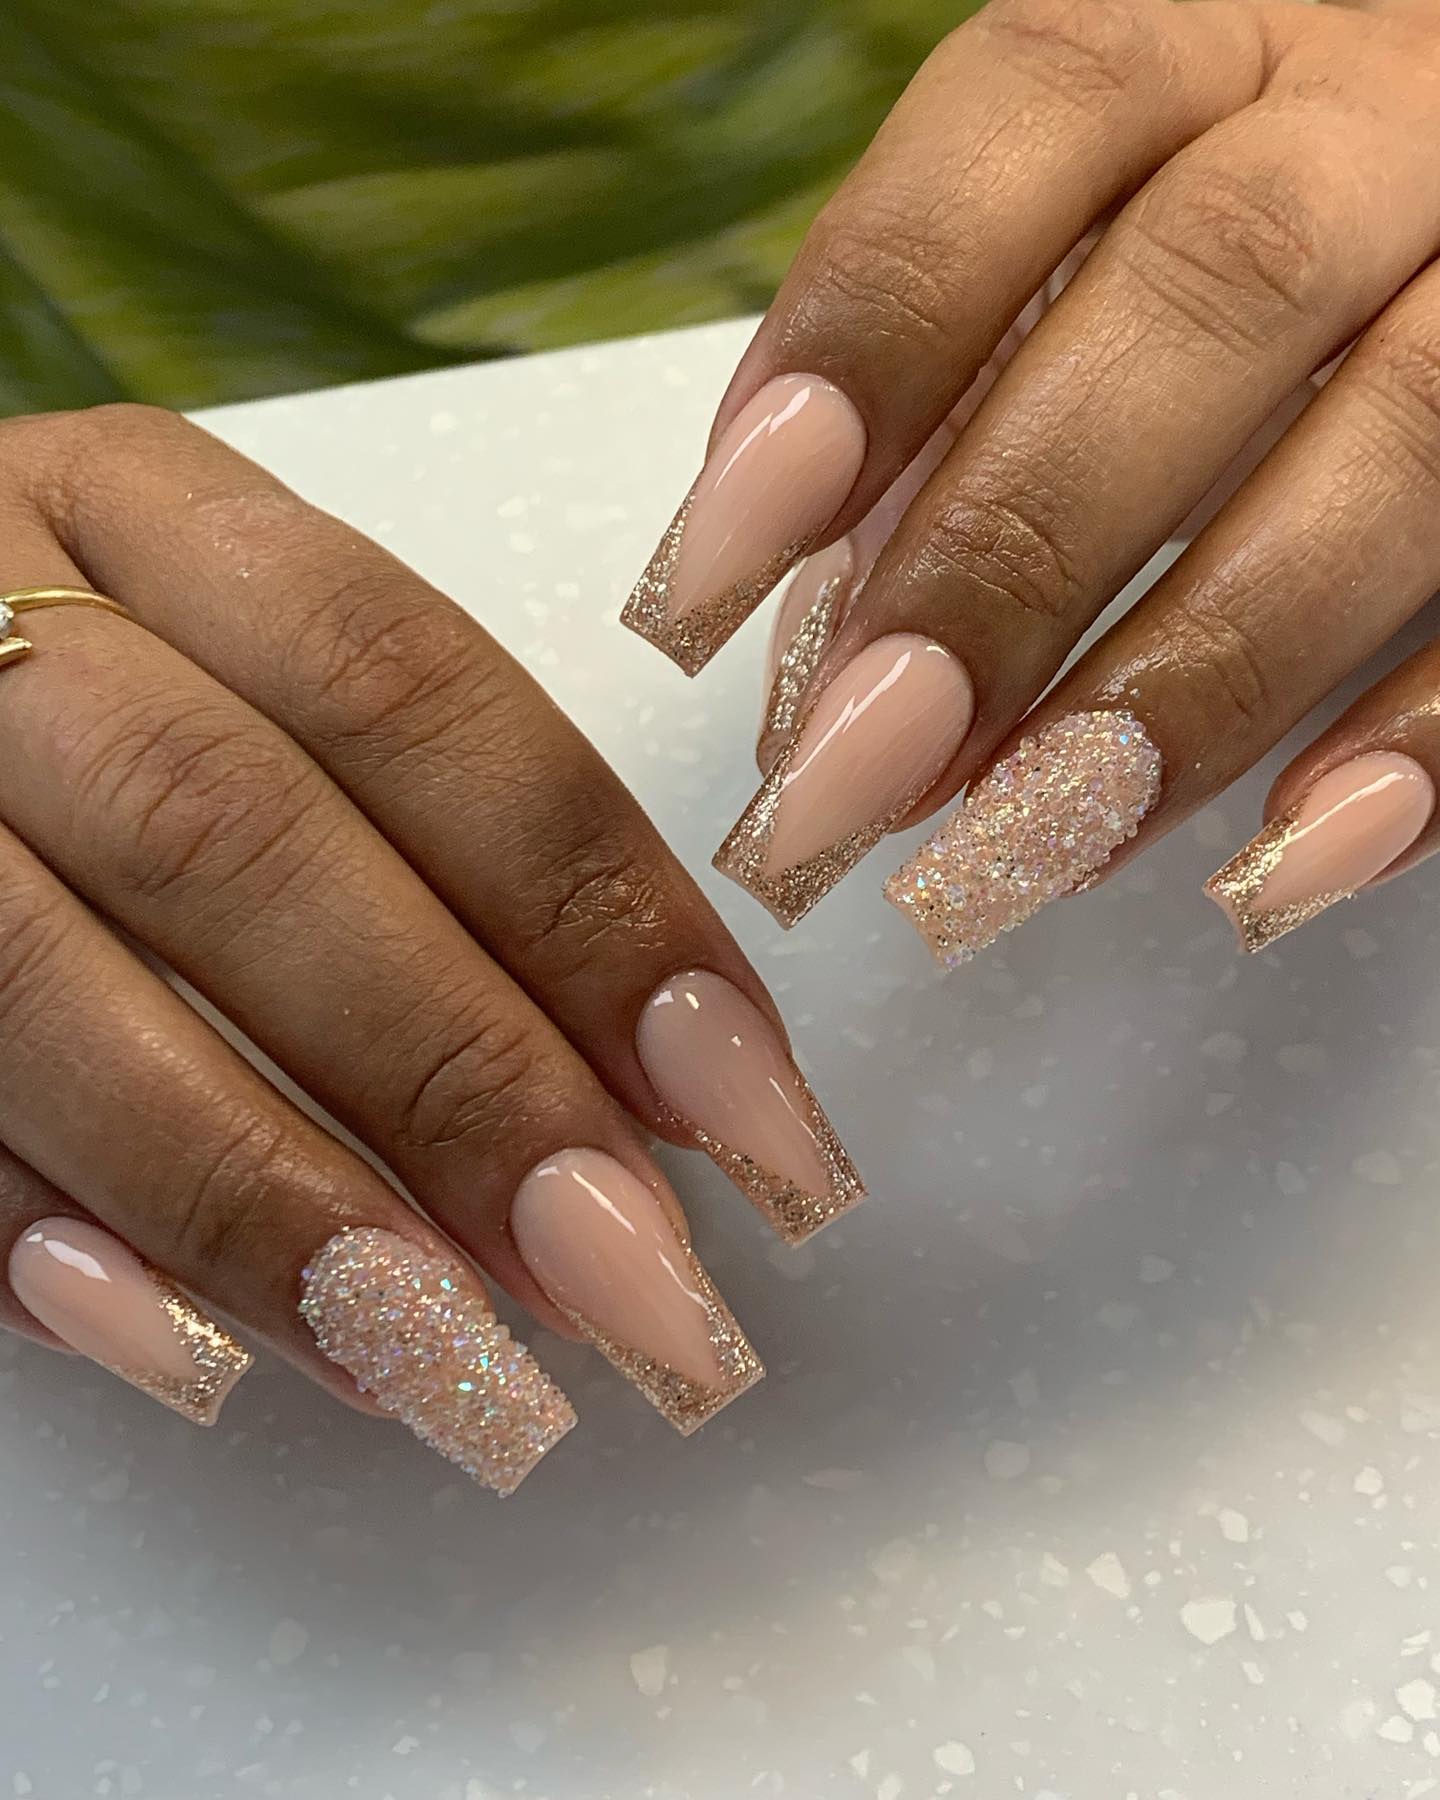 Cute glitter and nude nails such as these will look the best on women who enjoy elegance and nude shades.